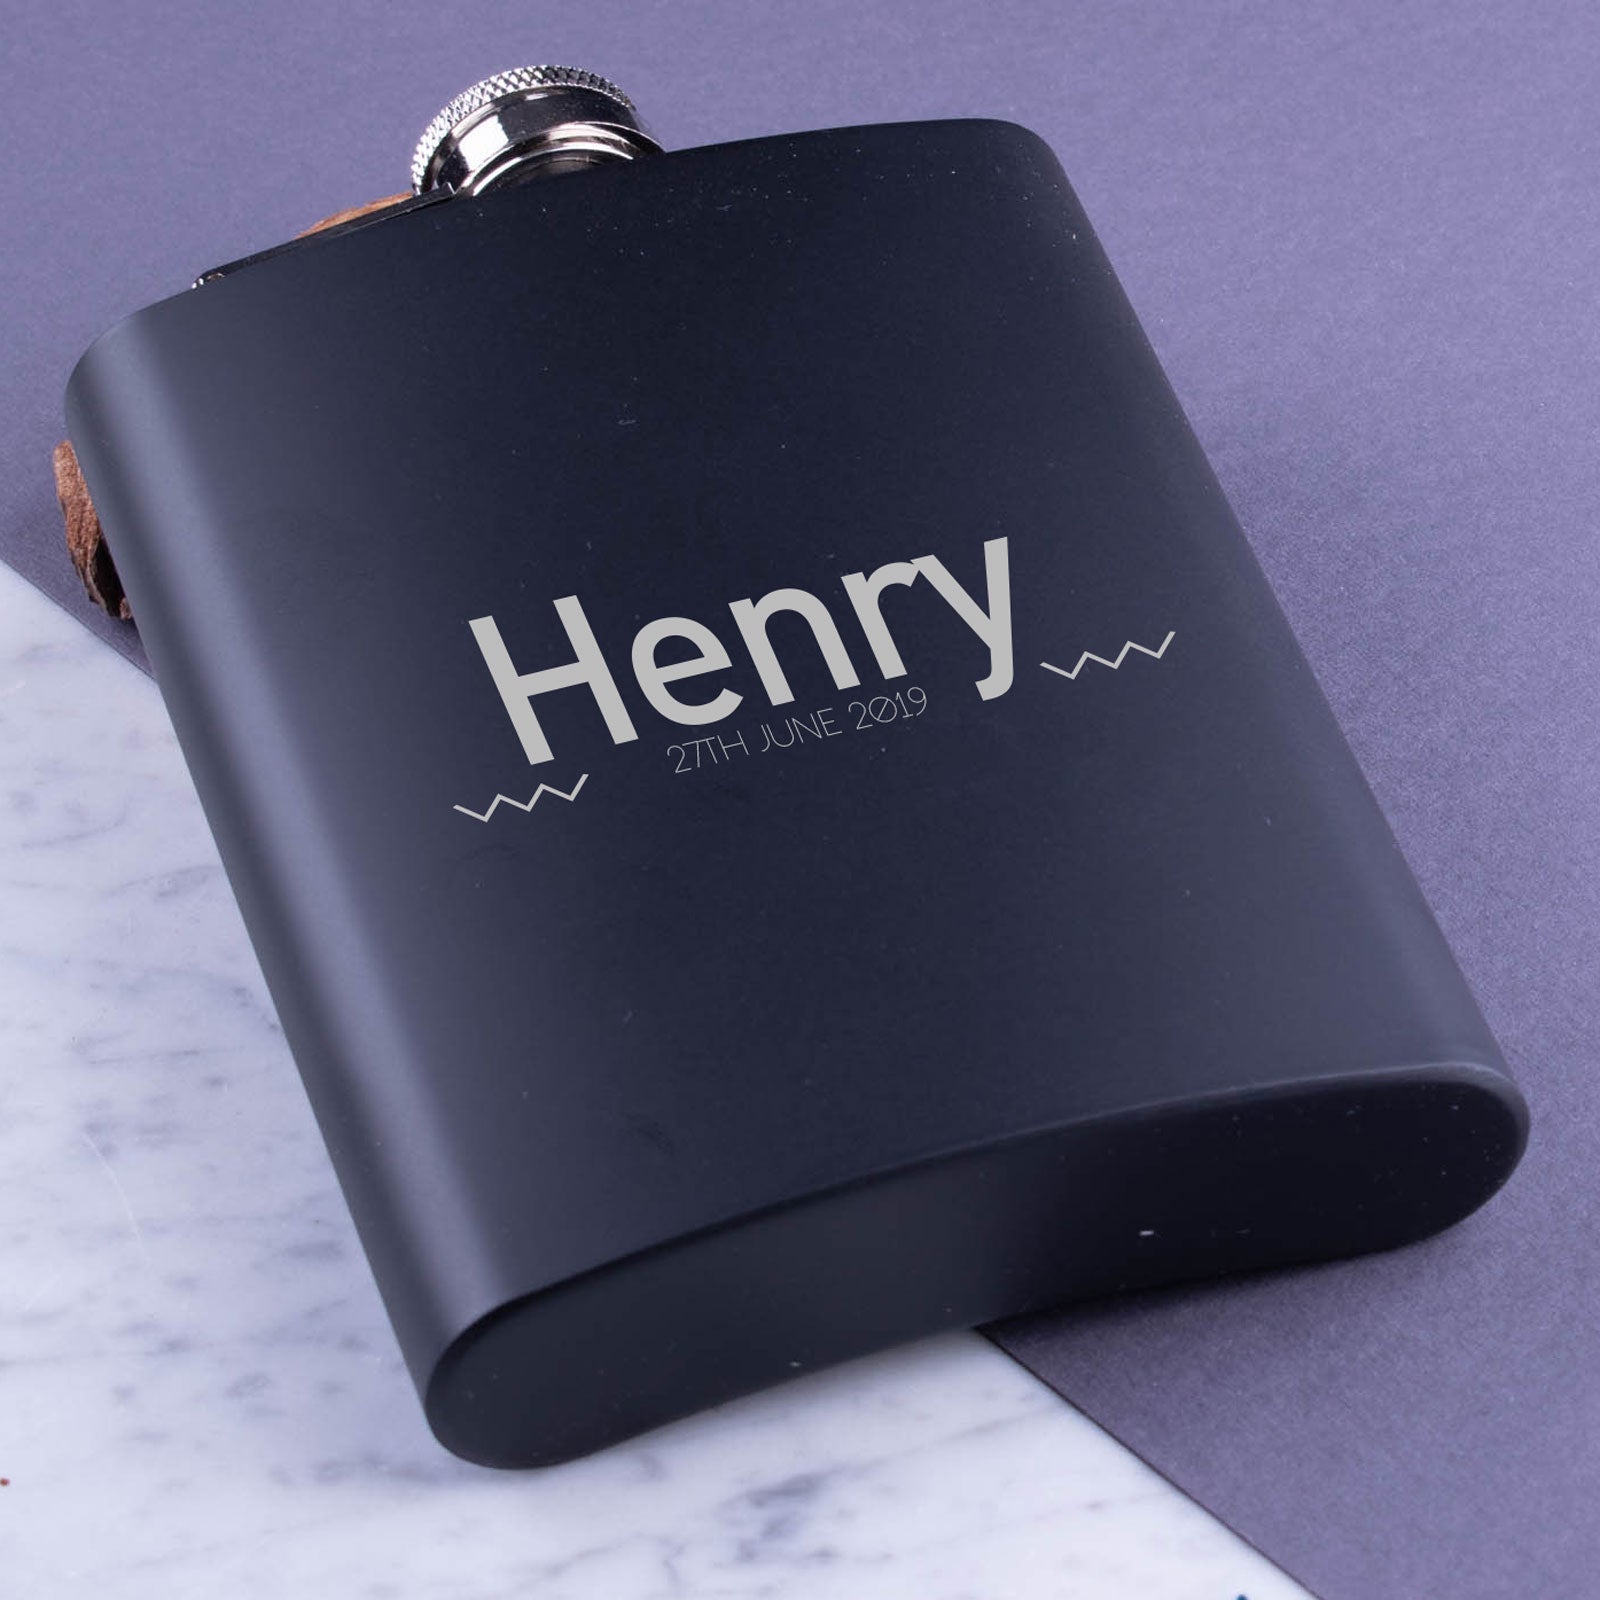 Personalised Metal Hip Flask - Perfect Gift - Any Message - Drink Time!